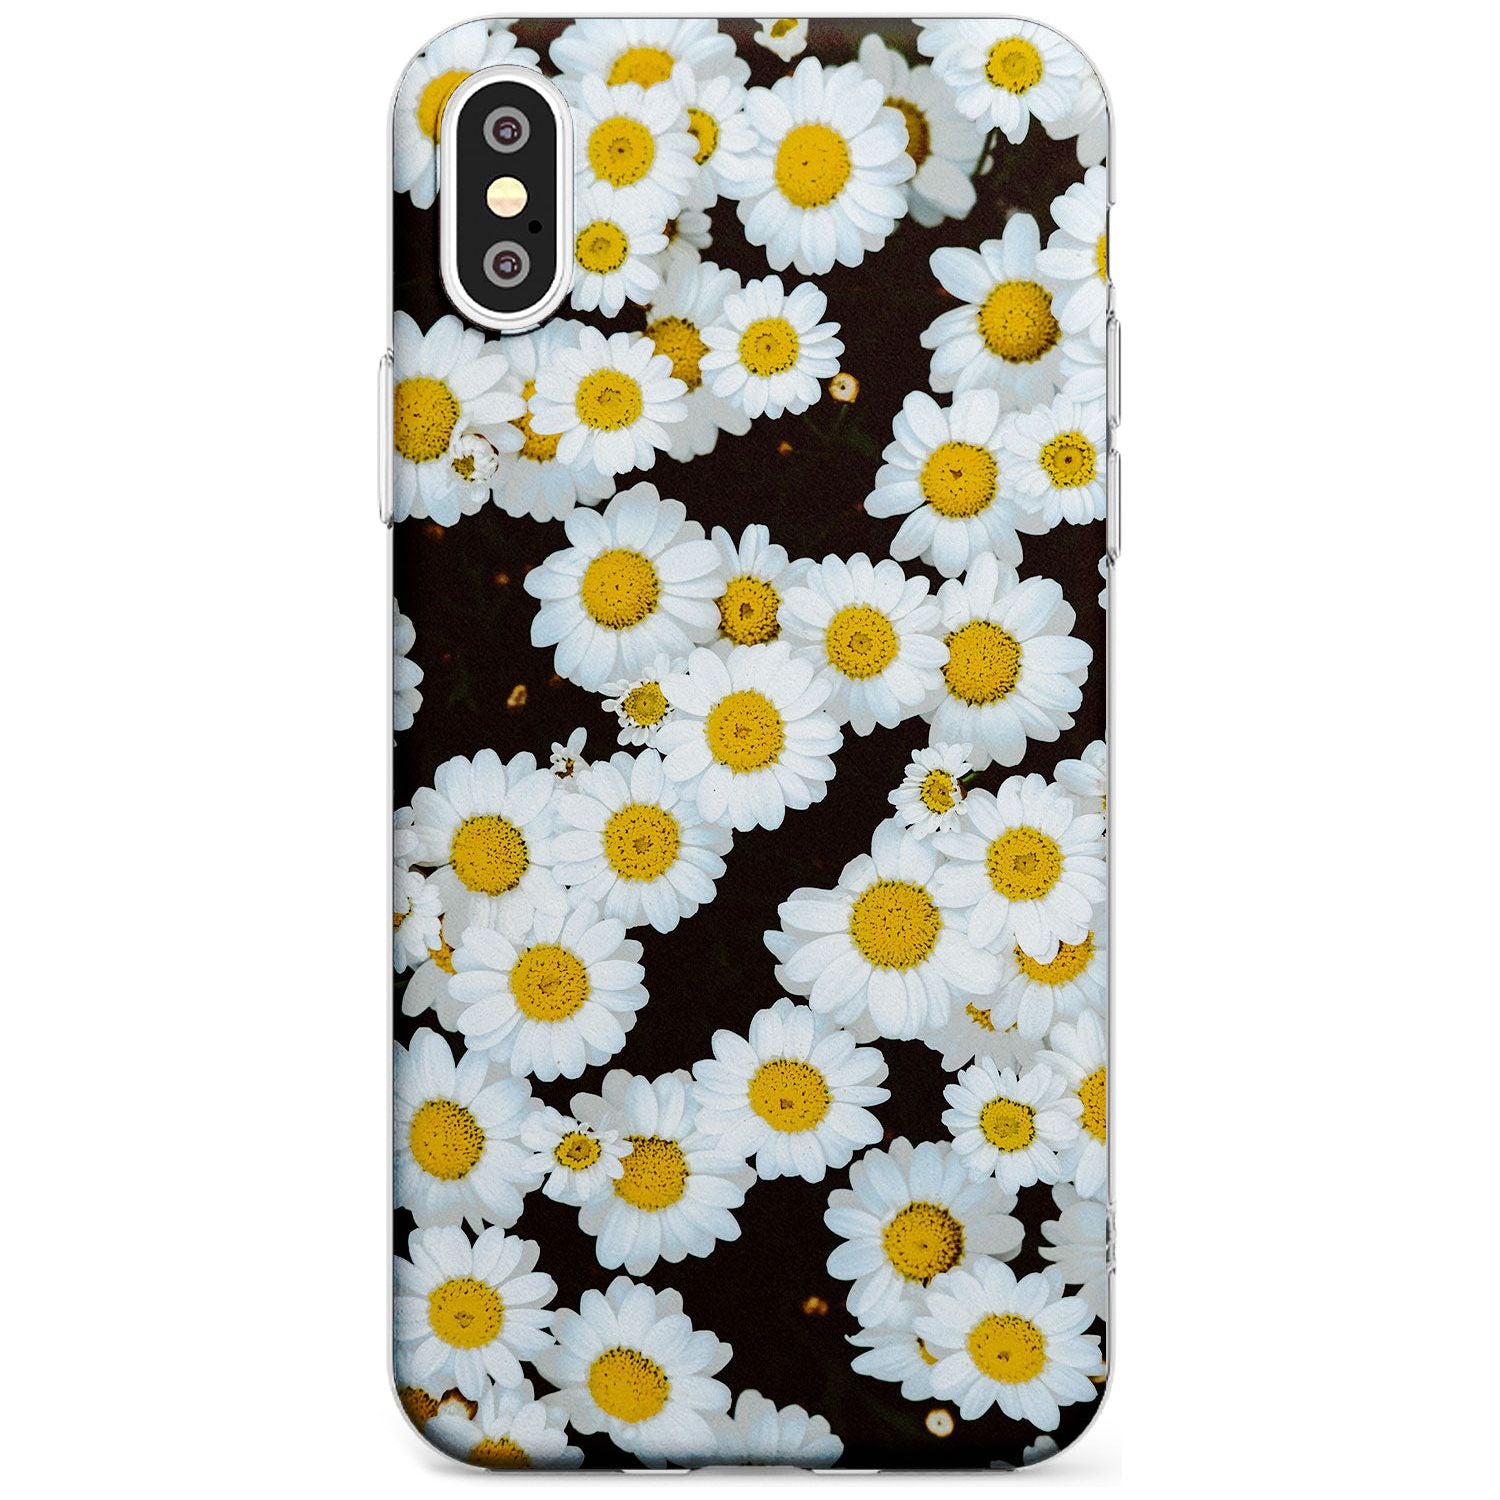 Daisies - Real Floral Photographs iPhone Case  Slim Case Phone Case - Case Warehouse